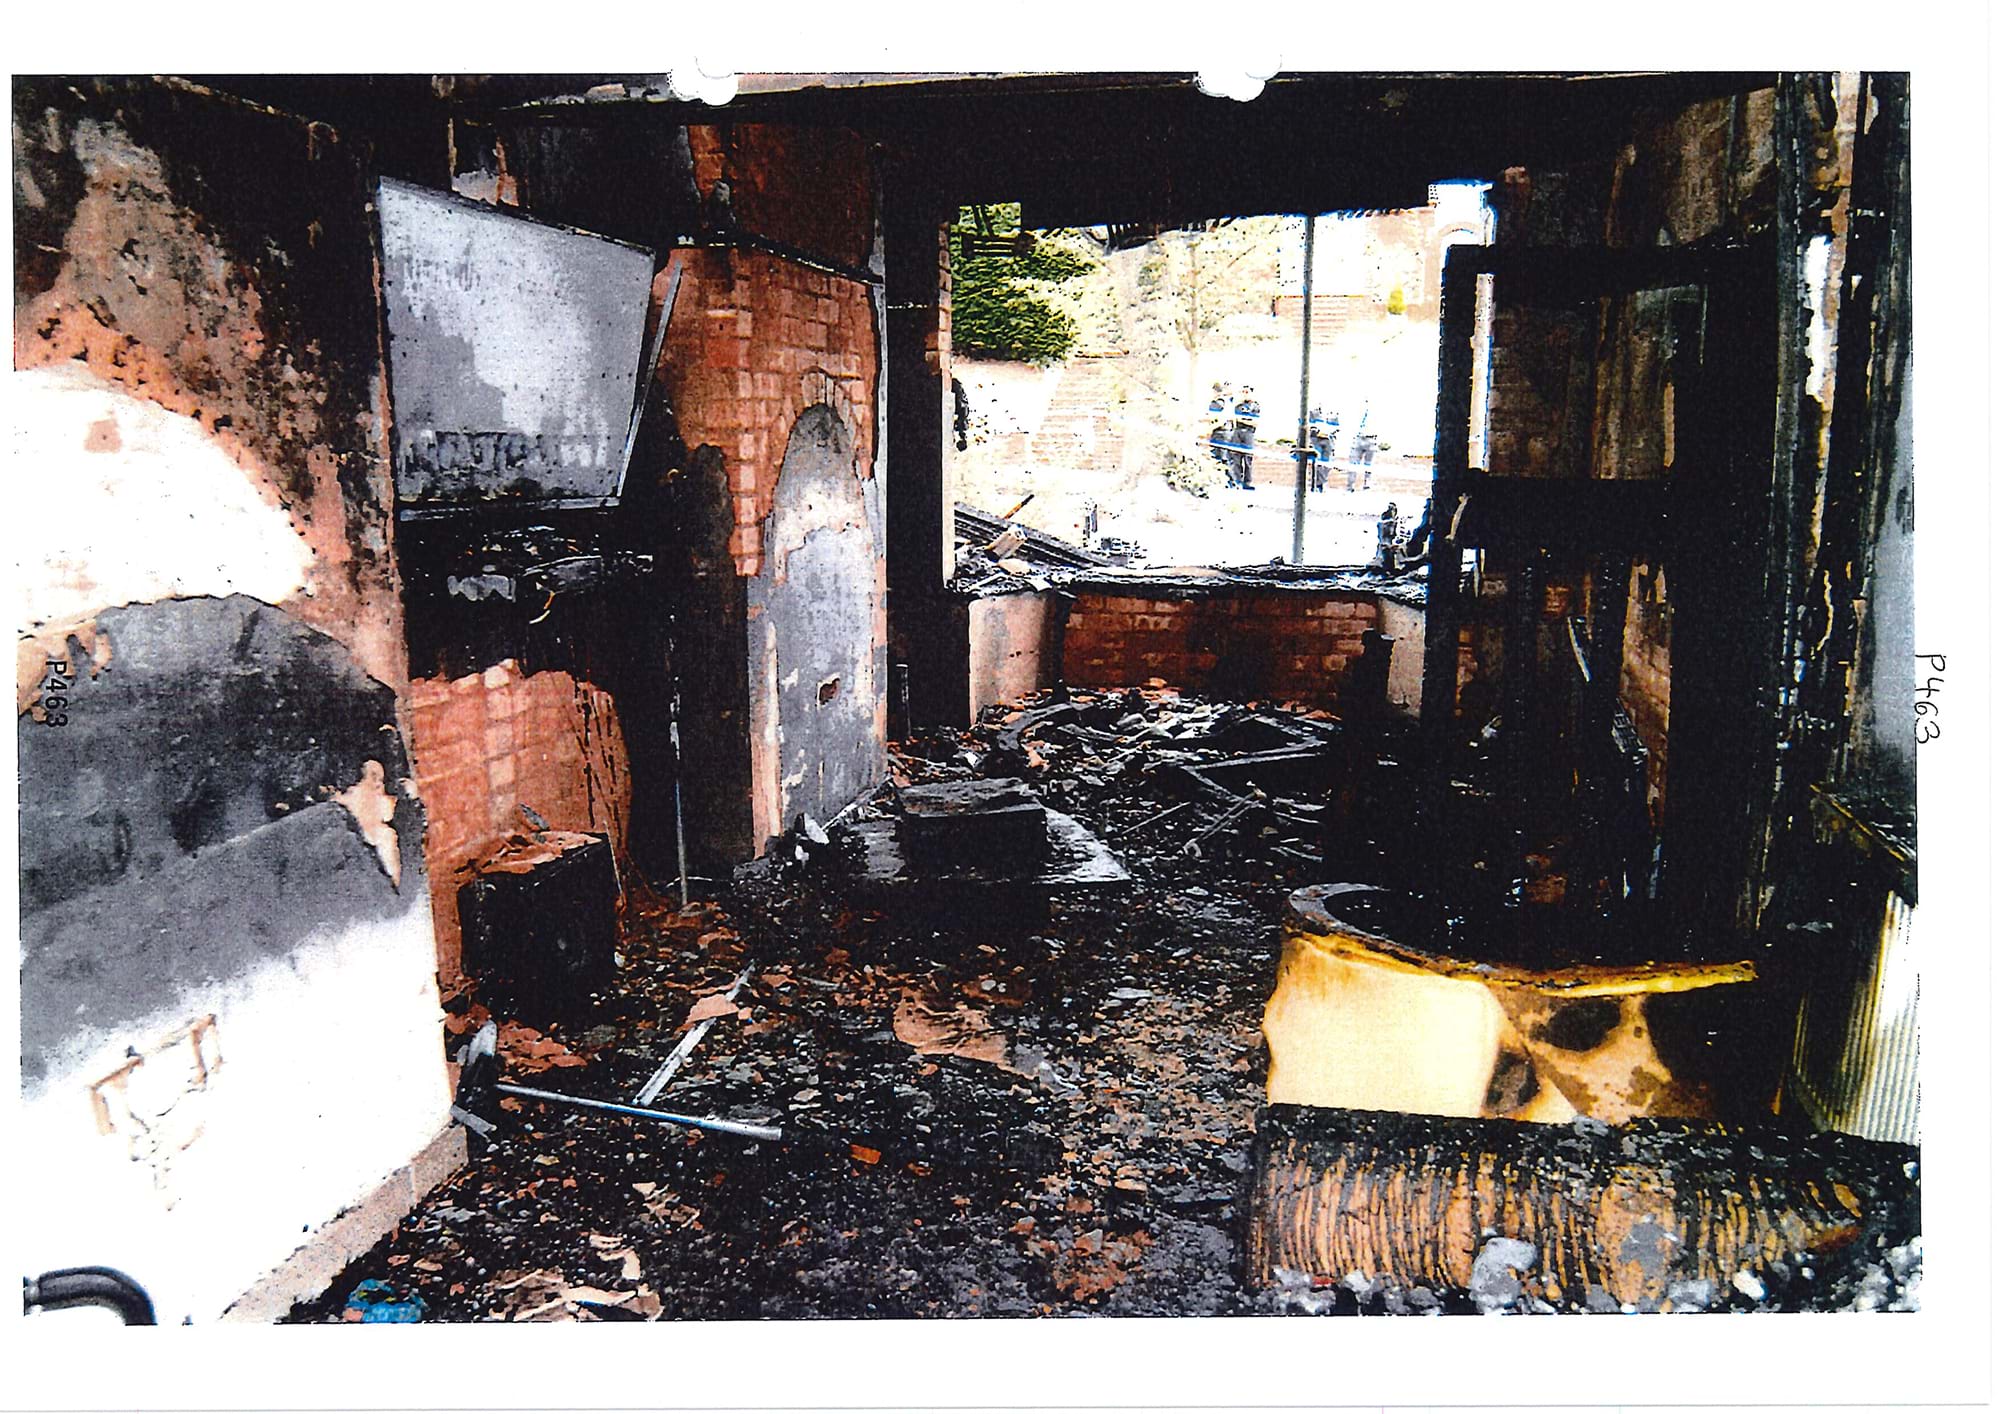 The burnt out home of the Begum family, after the appliance caused the fire.